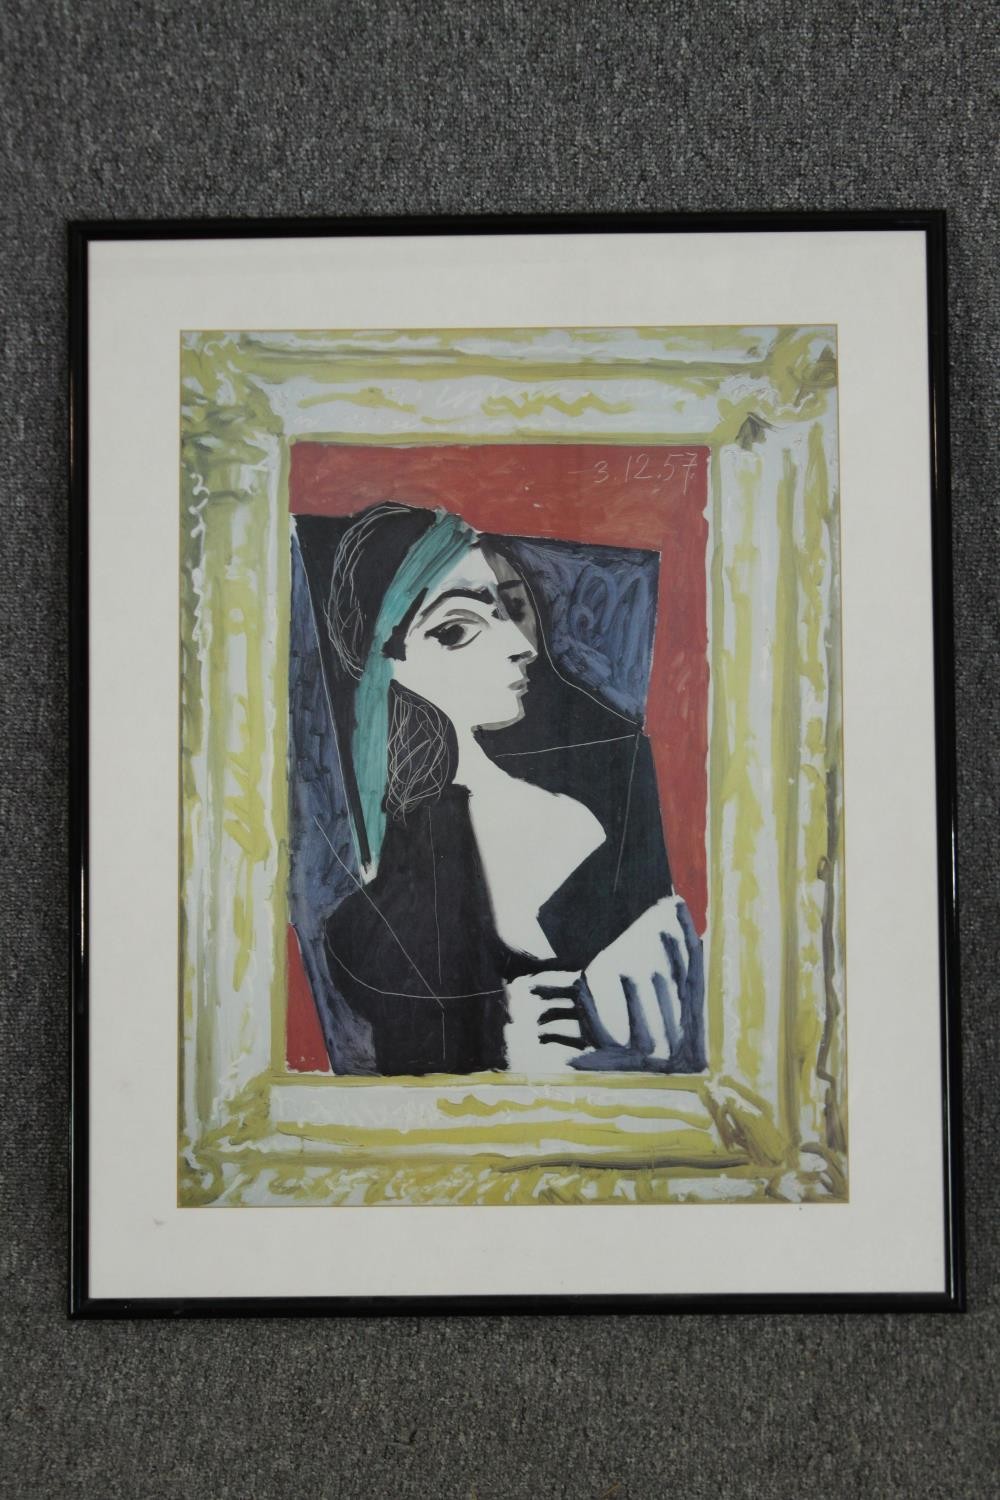 After Picasso, lithograph, Portrait Jaqueline. Framed and glazed. H.72 W.58cm. - Image 2 of 4